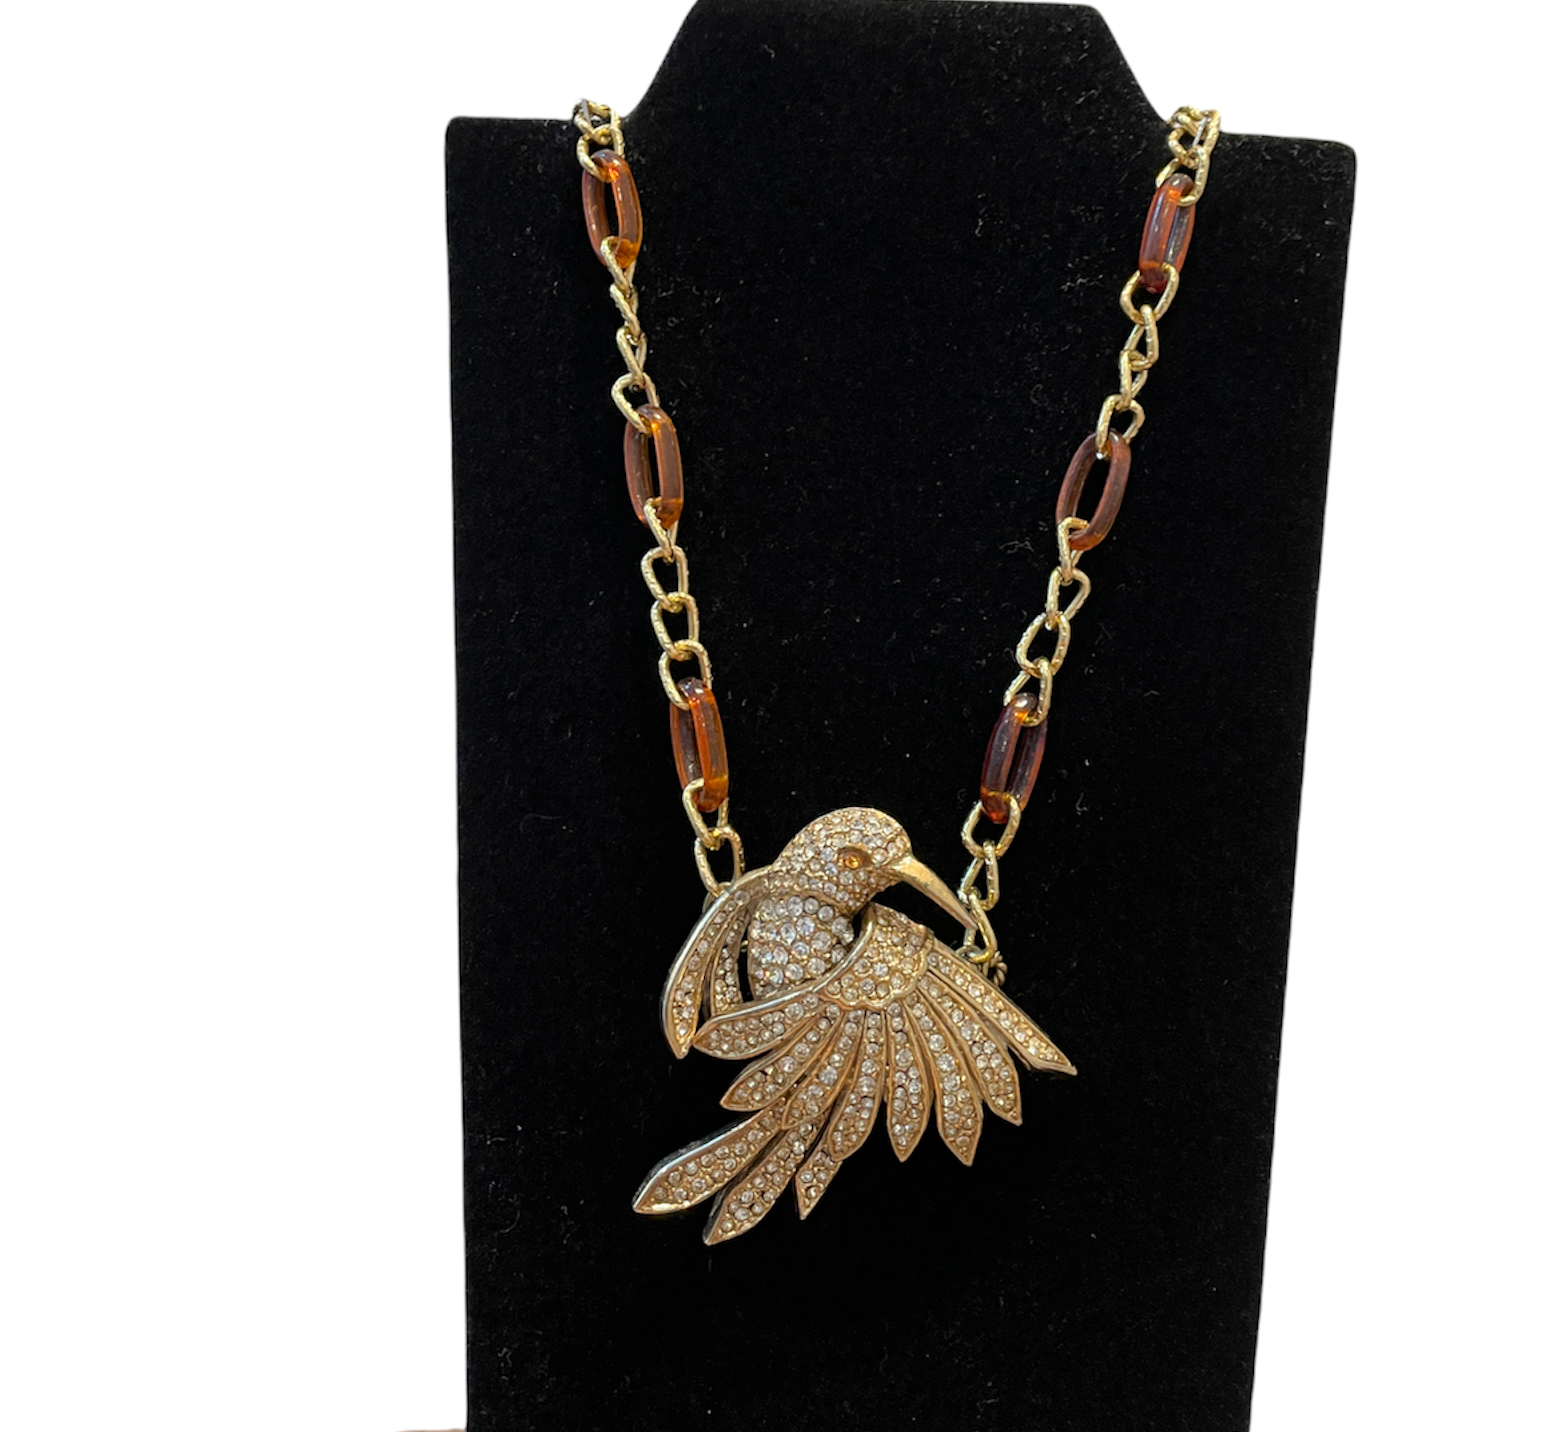 "Preening Bird" Handmade one-of-a-kind bird necklace (upcycled from vintage )